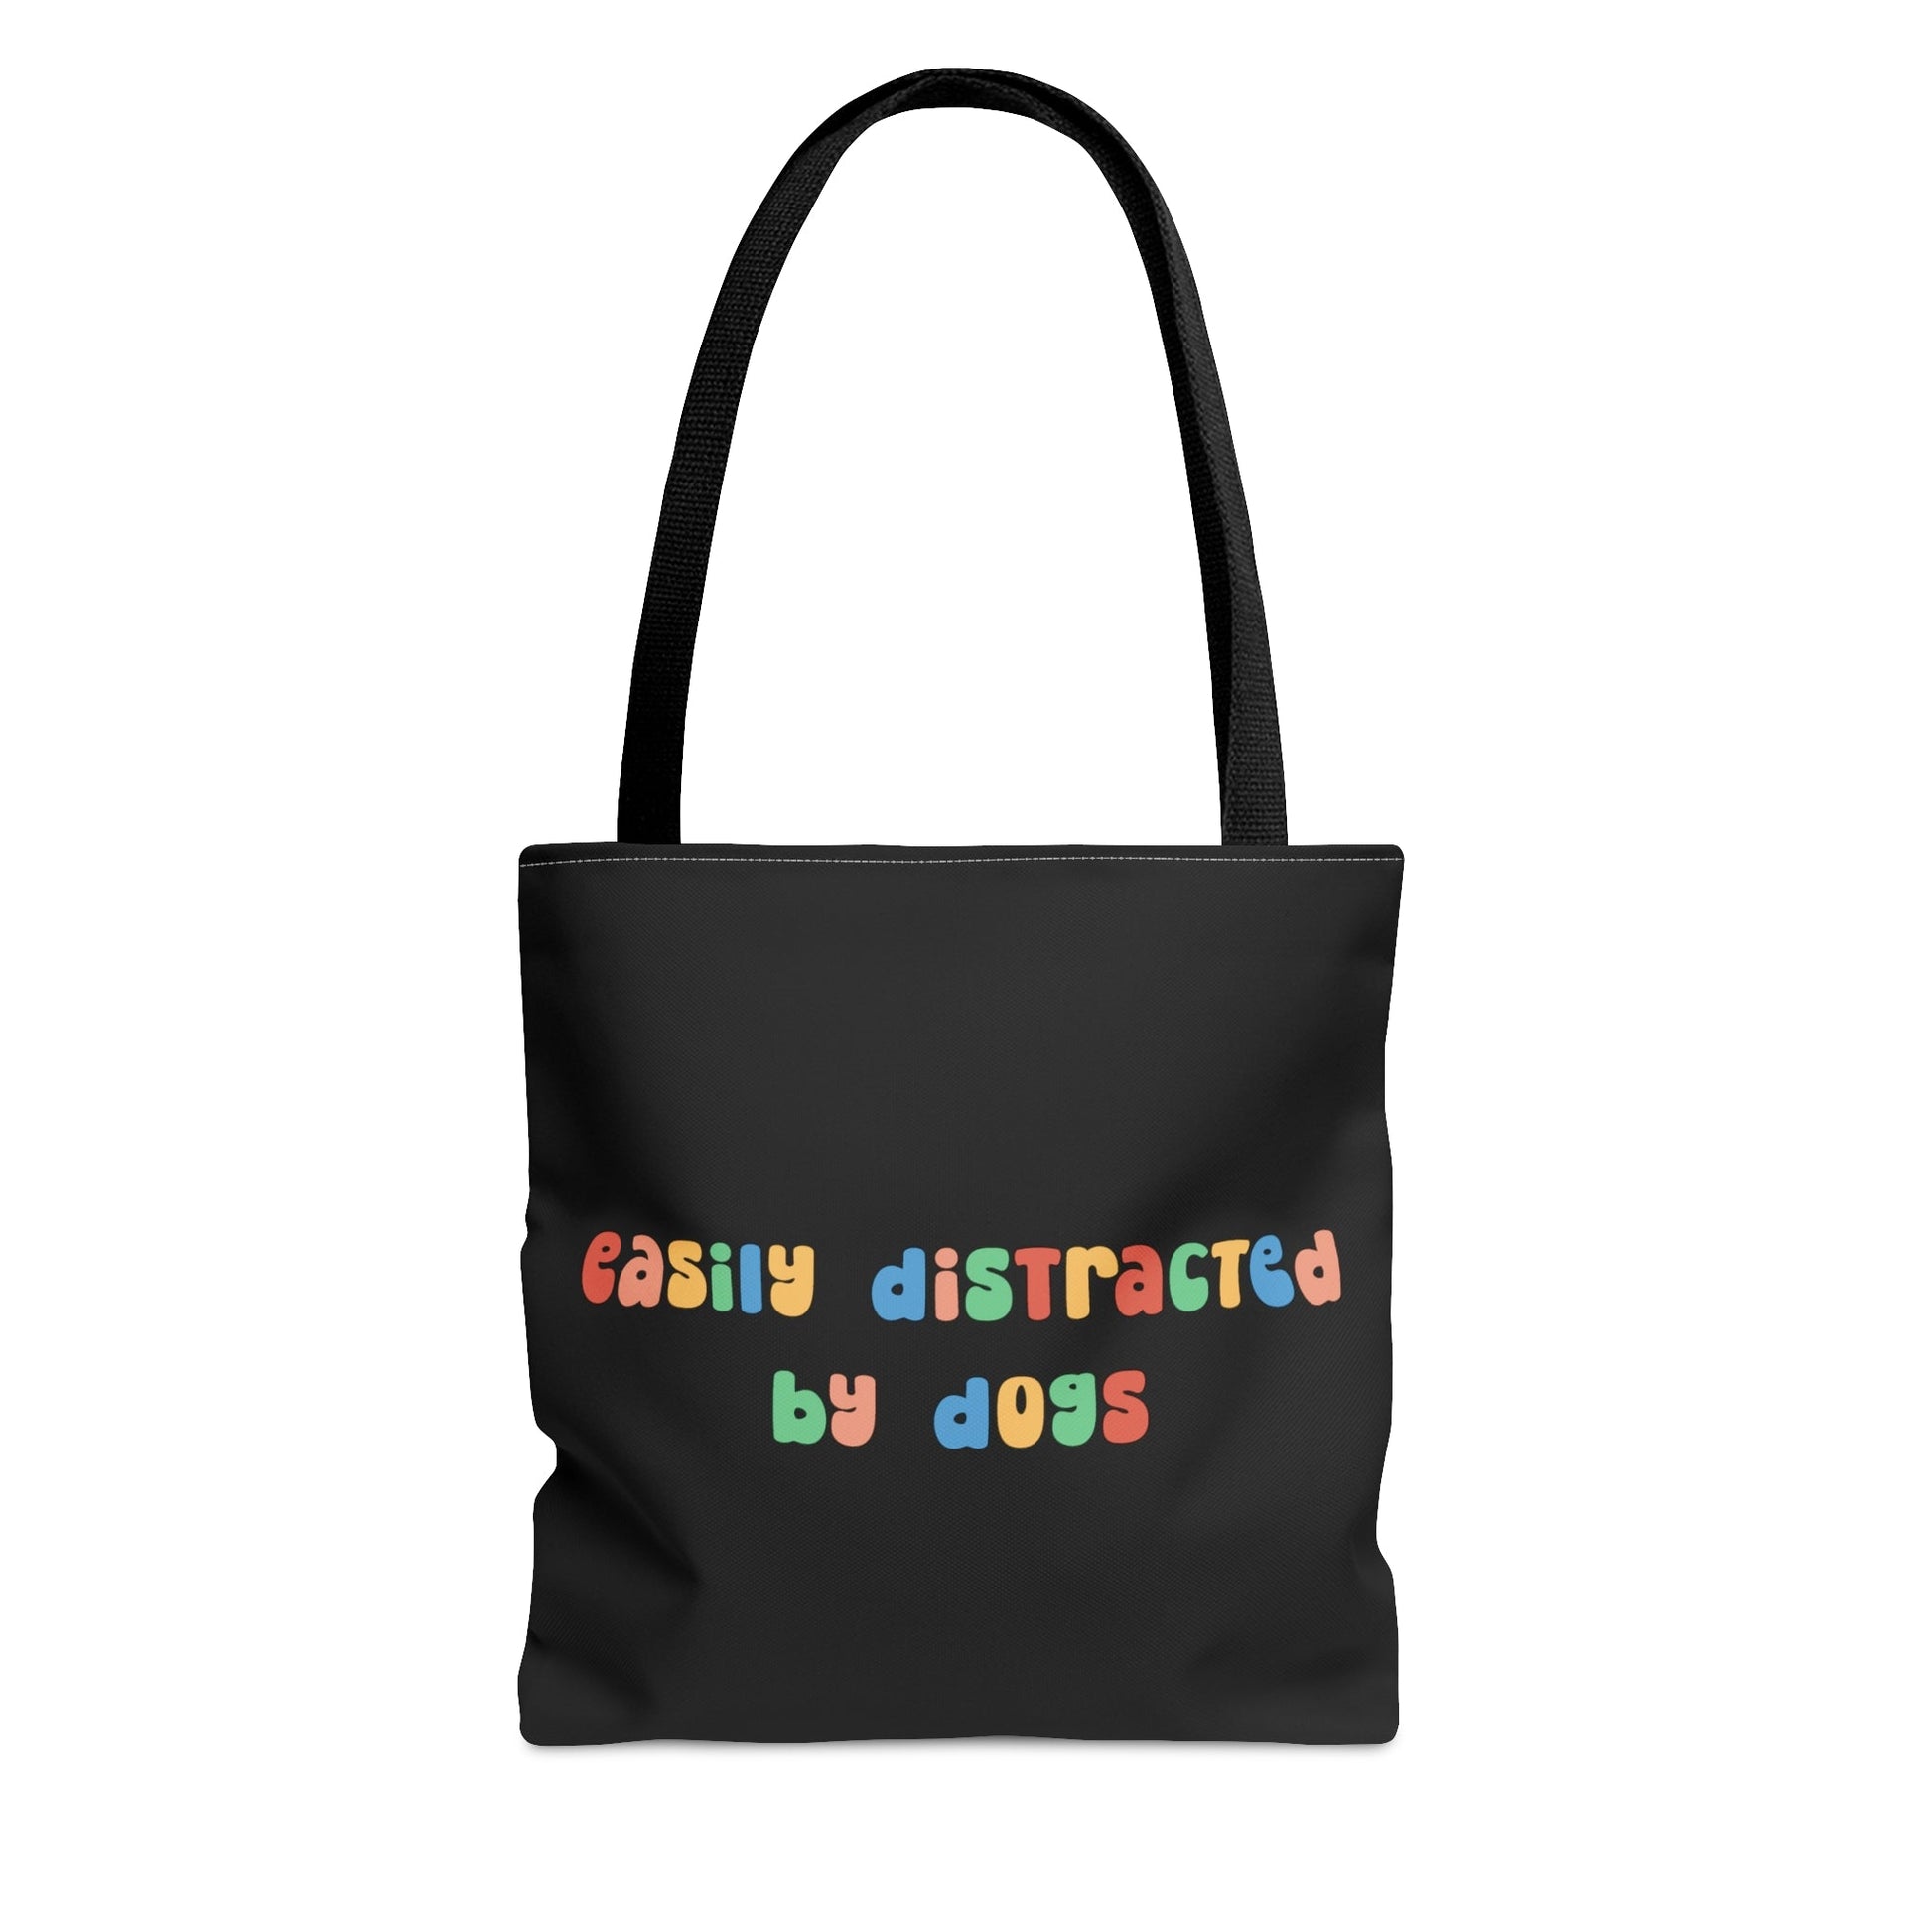 Easily Distracted by Dogs | Tote Bag - Detezi Designs-24892960574588248672